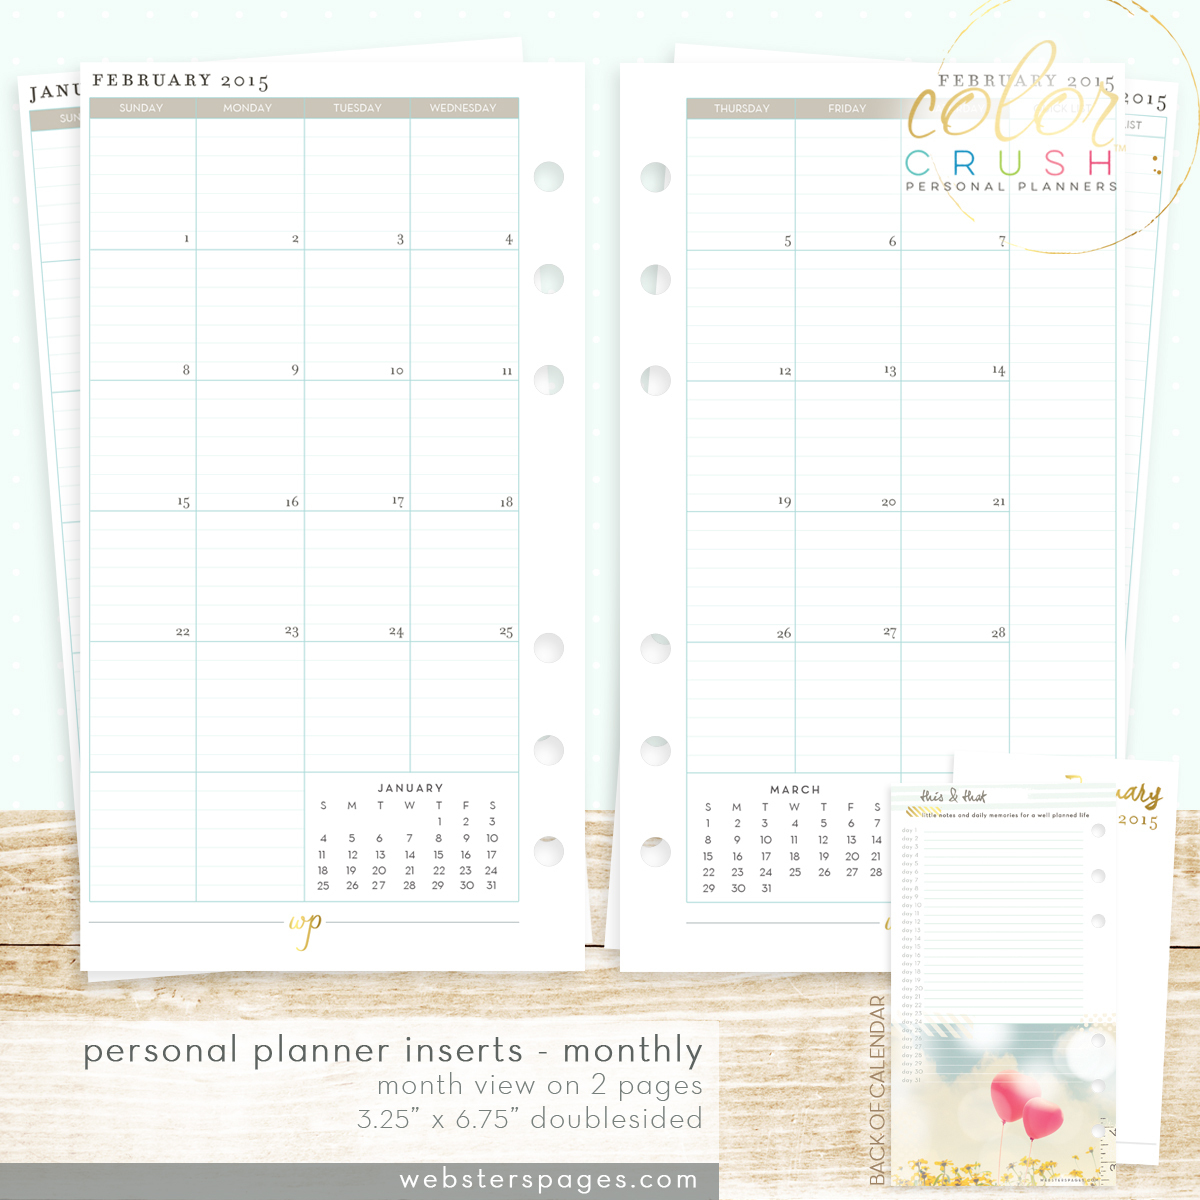 Планер PERSONAL PLANNER KIT : Light Pink  by Websters Pages